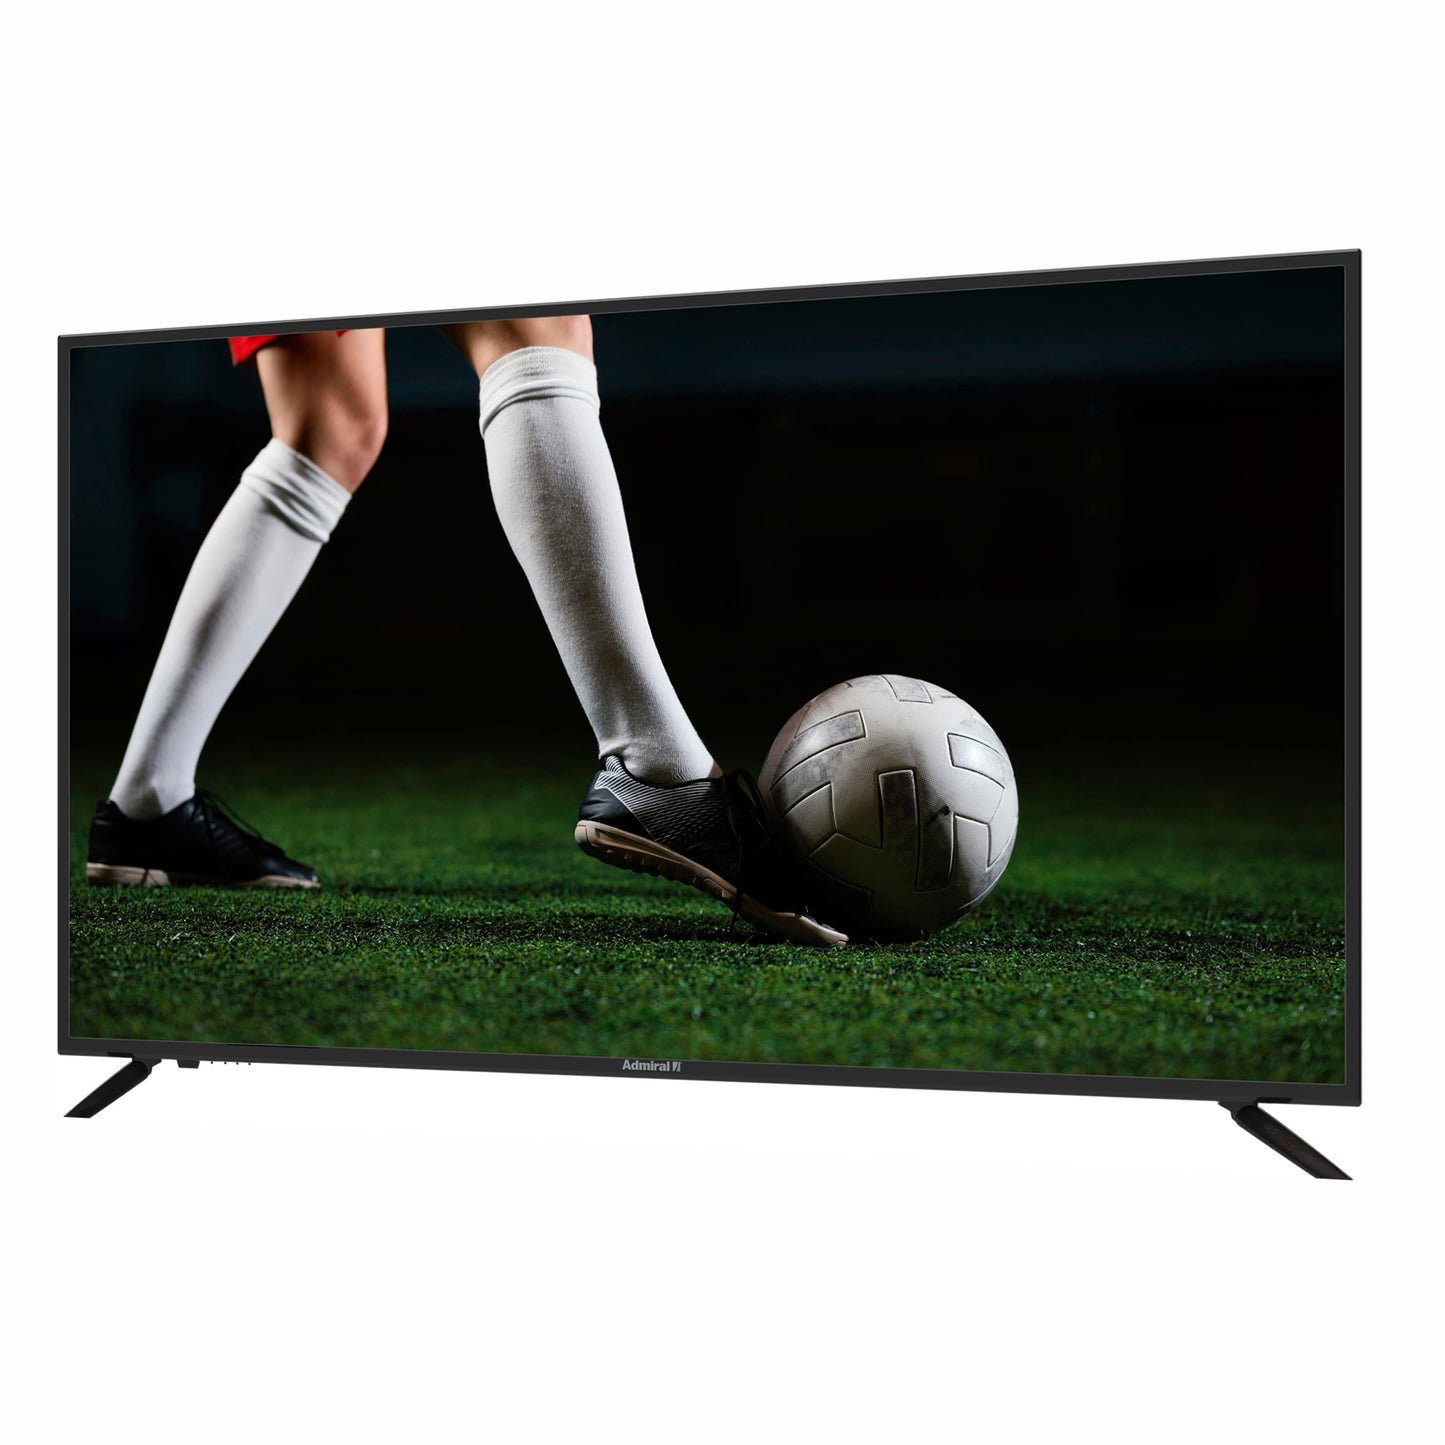 Admiral 43 inch Android Smart TV, ADL43FMSACP